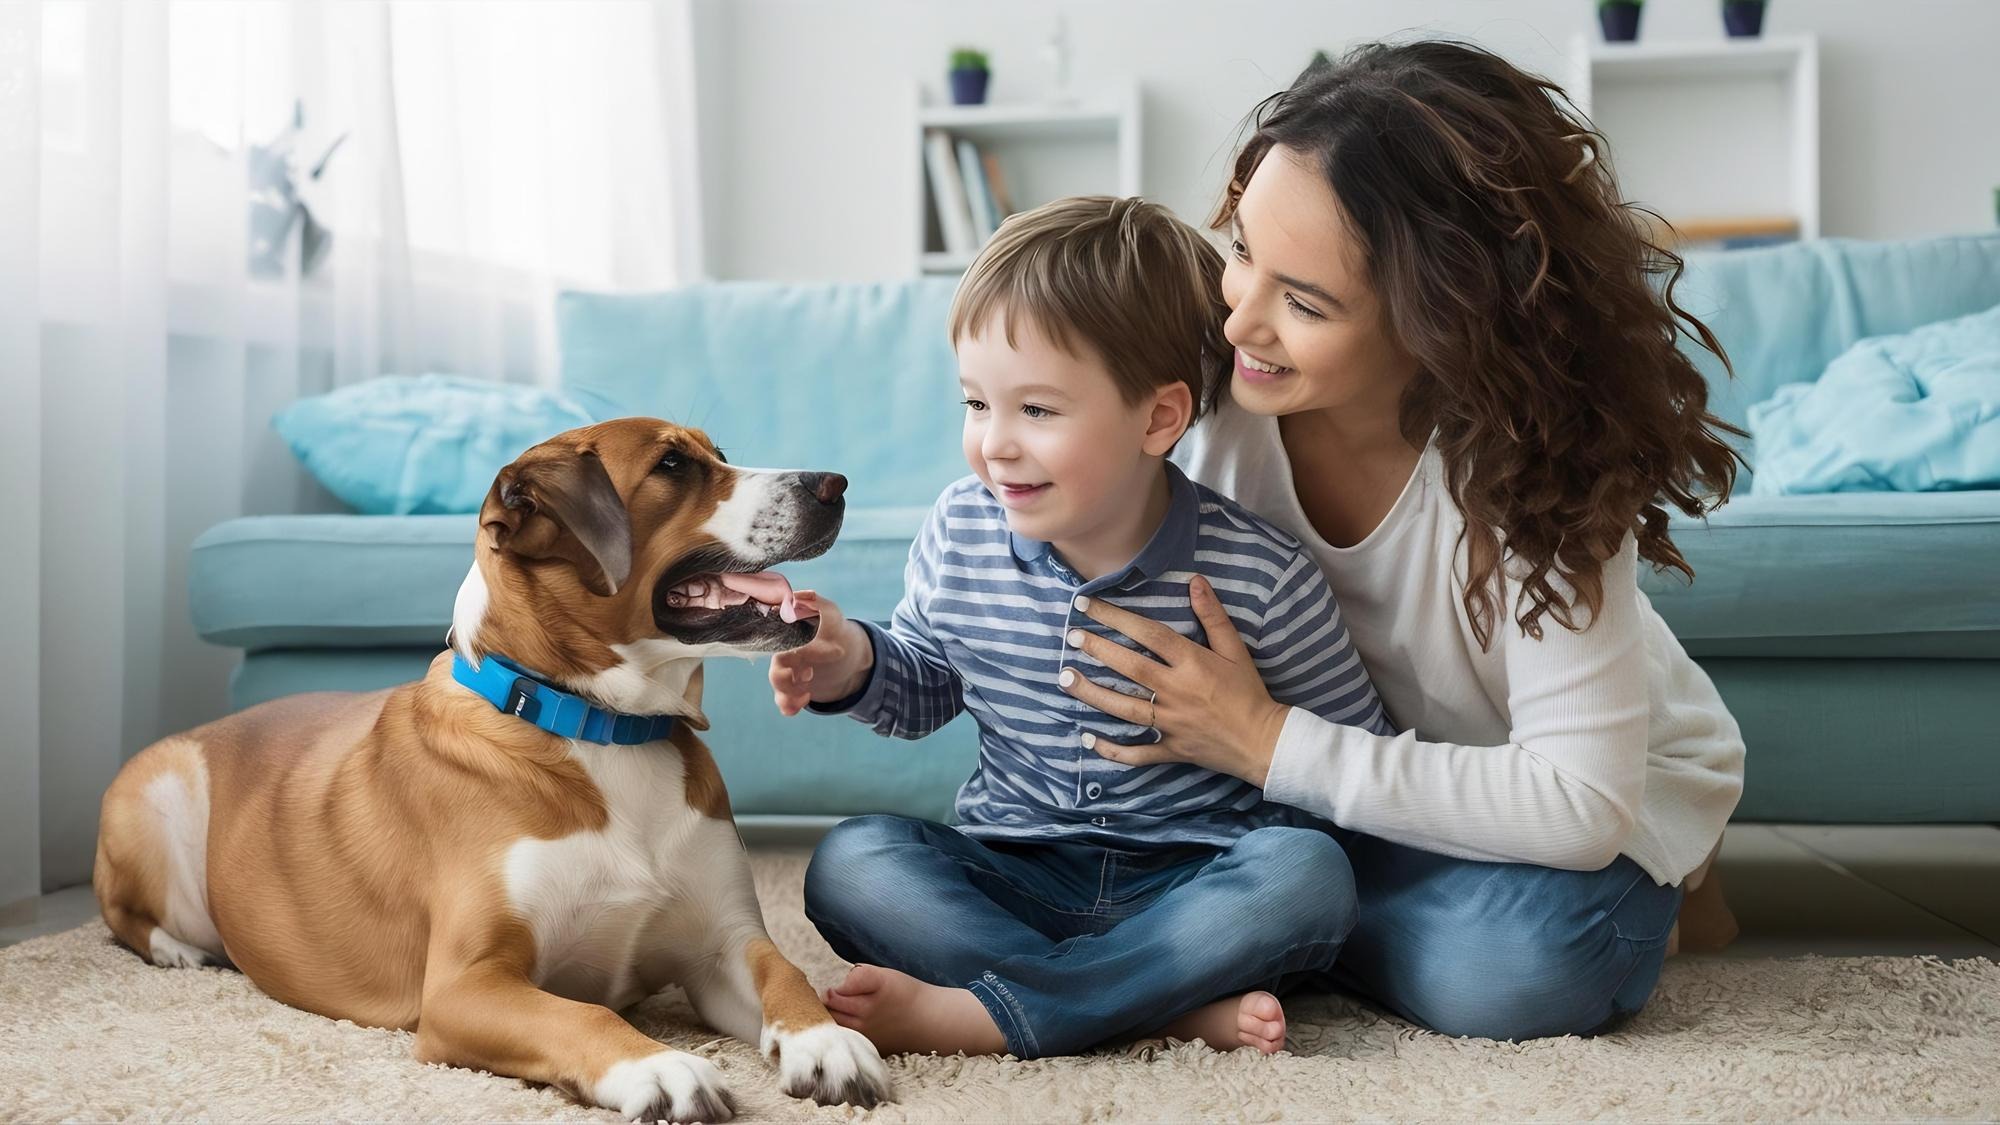 Pet Insurance for Your Dog